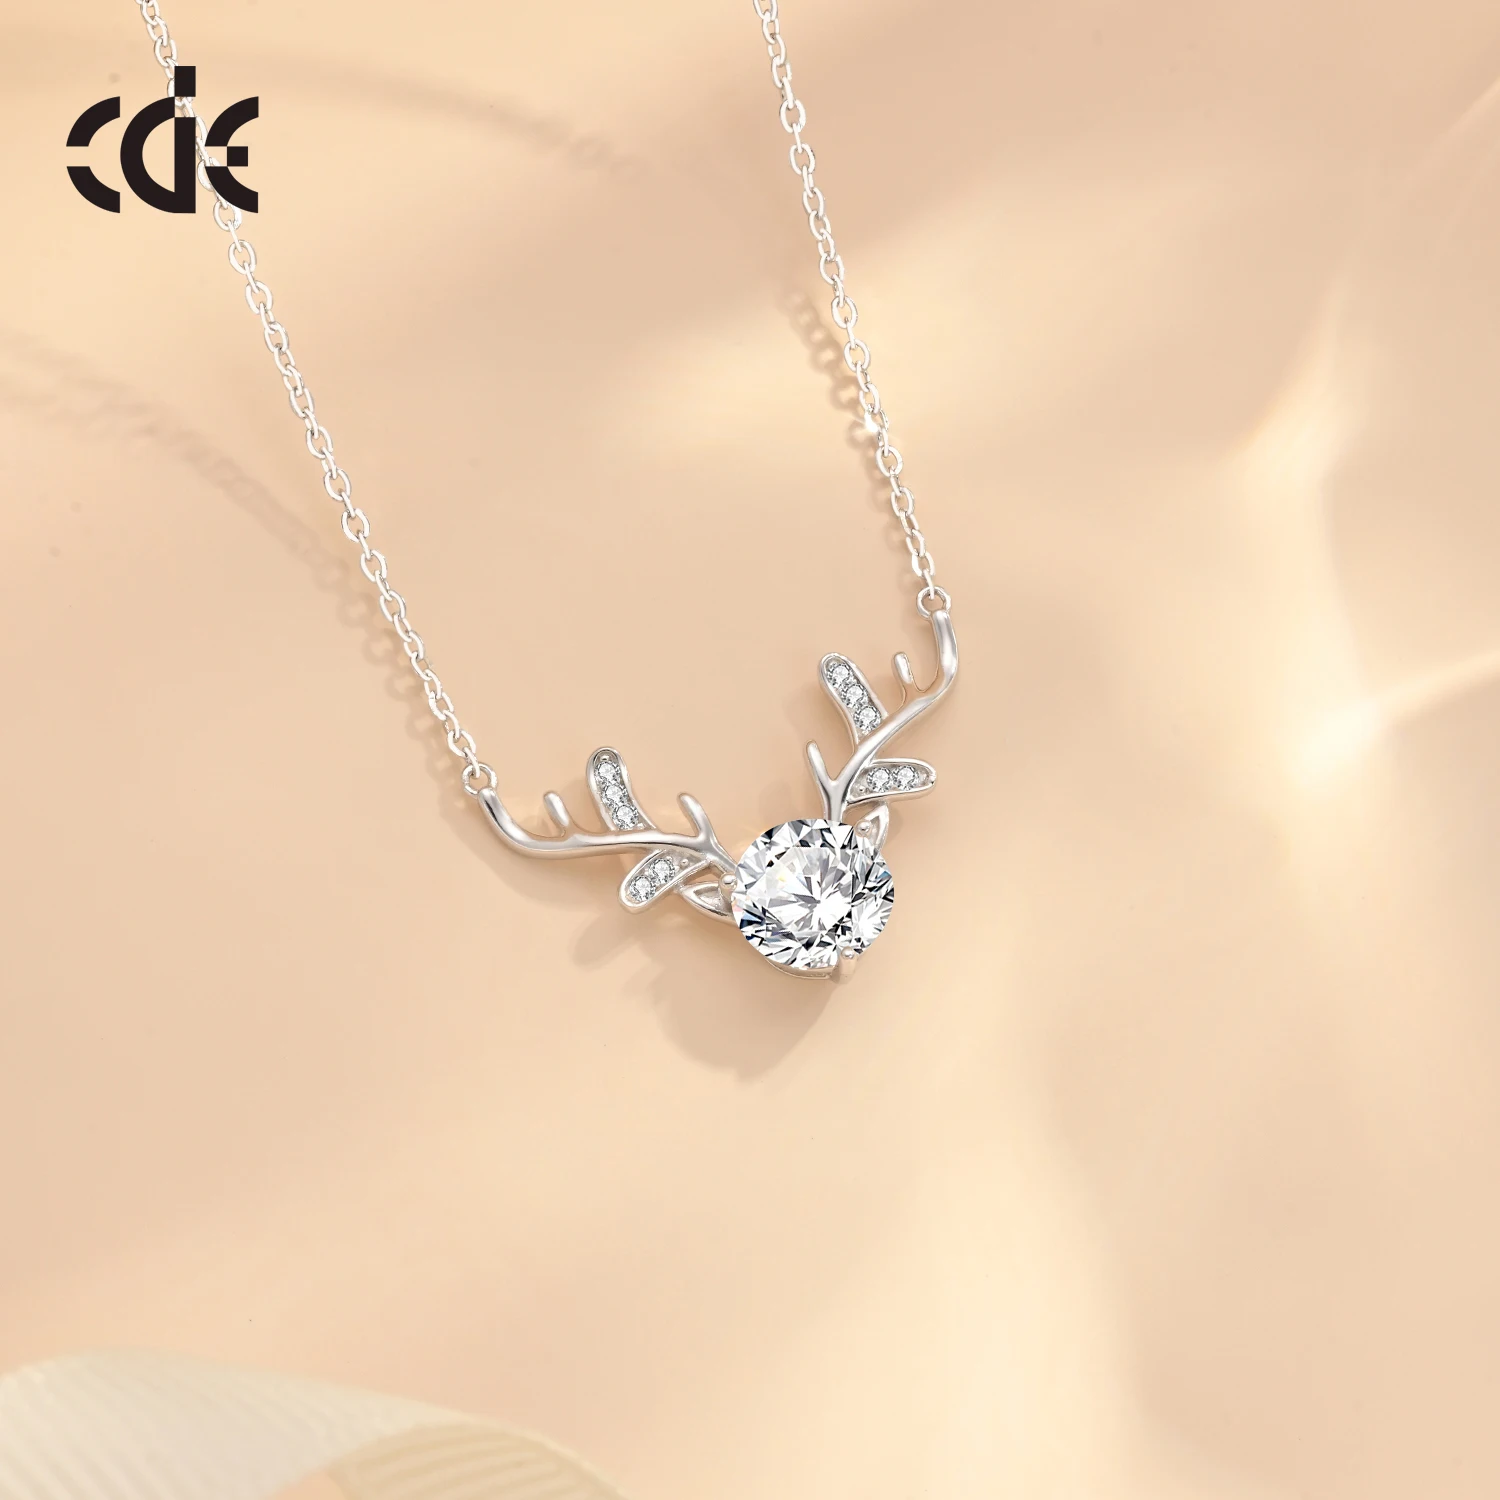 CDE MV00160 Fine 925 Sterling Silver Christmas Jewelry Moissanite Necklace Christmas Decoration Gift Deer Pendant Necklace